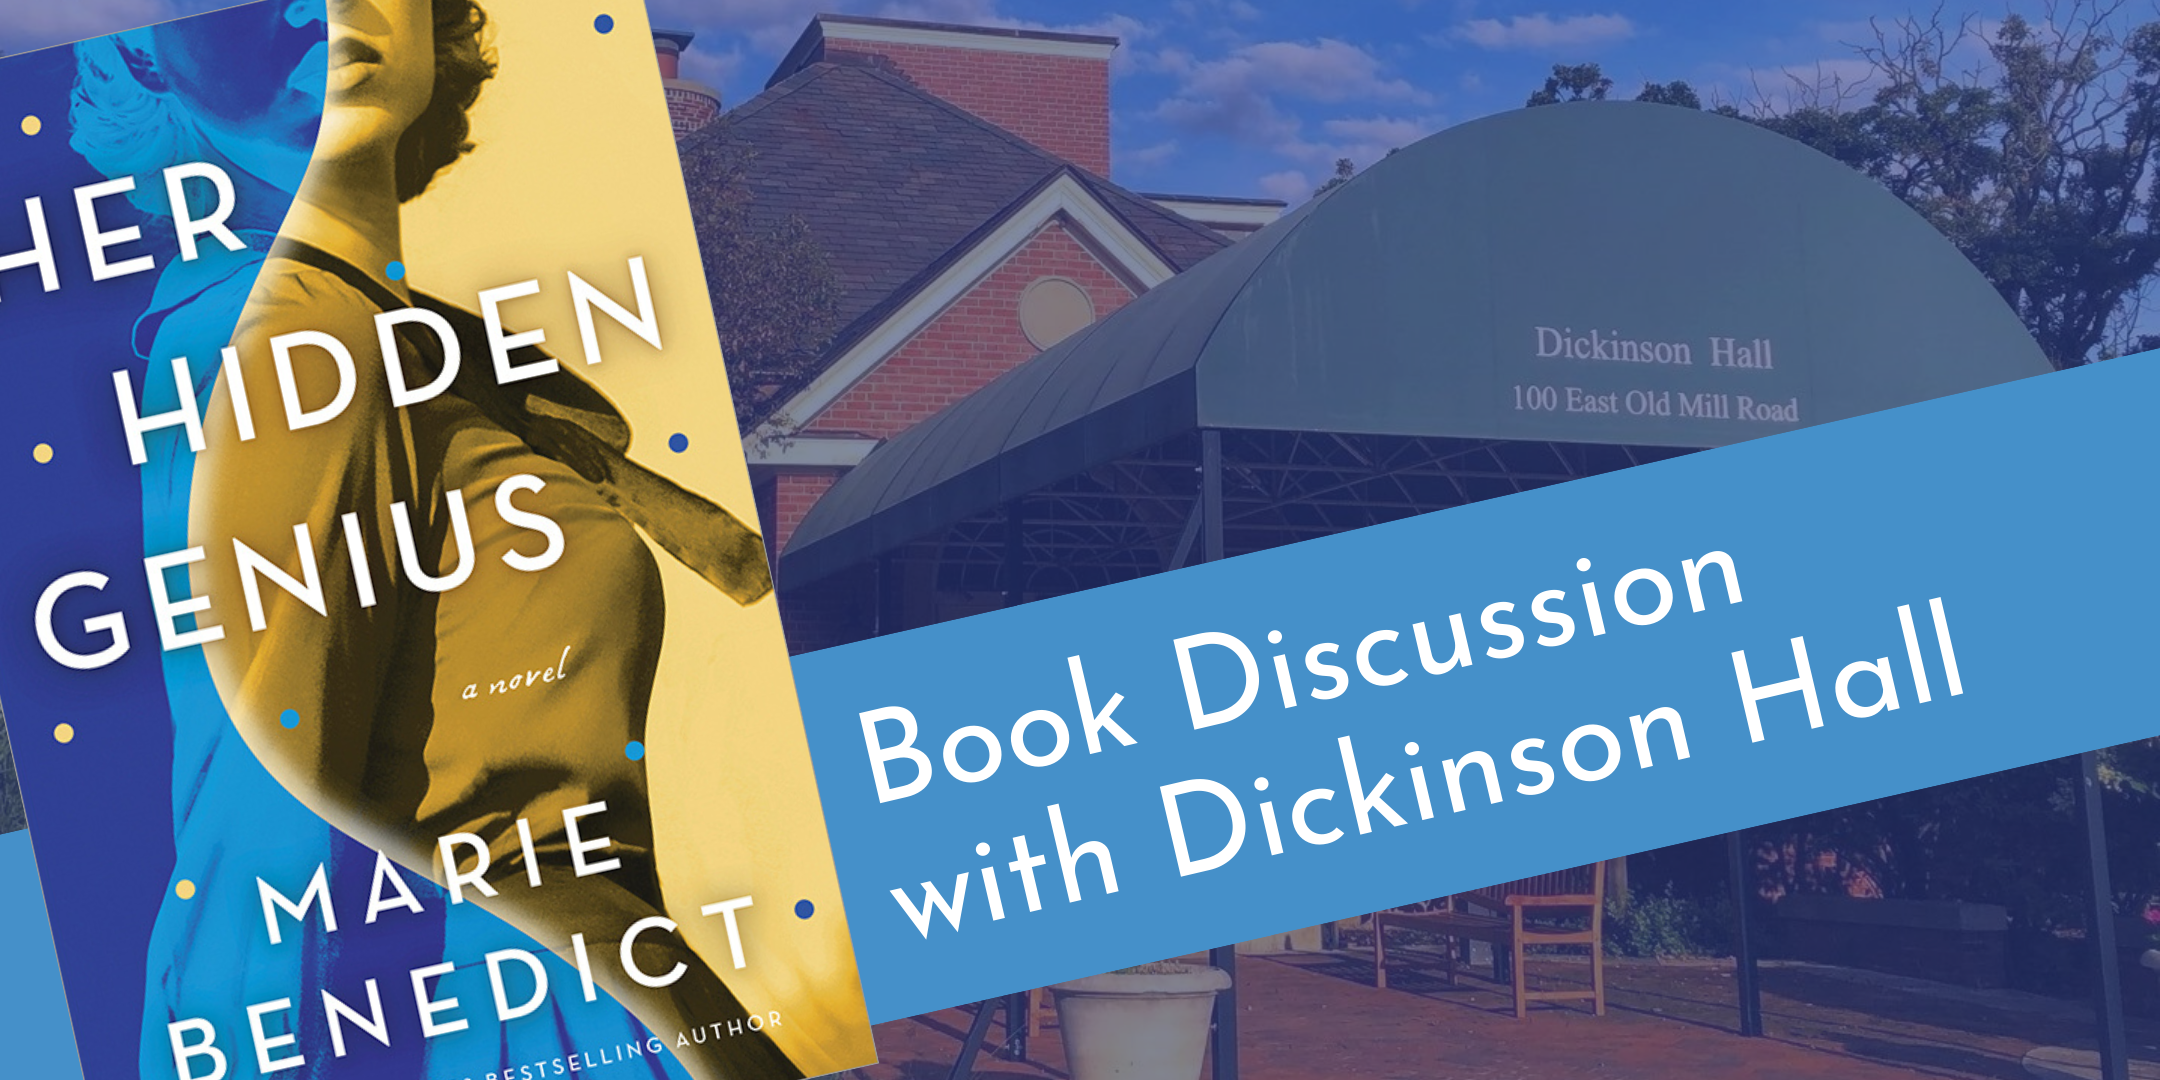 image of "Book Discussion at Dickinson Hall of "Her Hidden Genius""